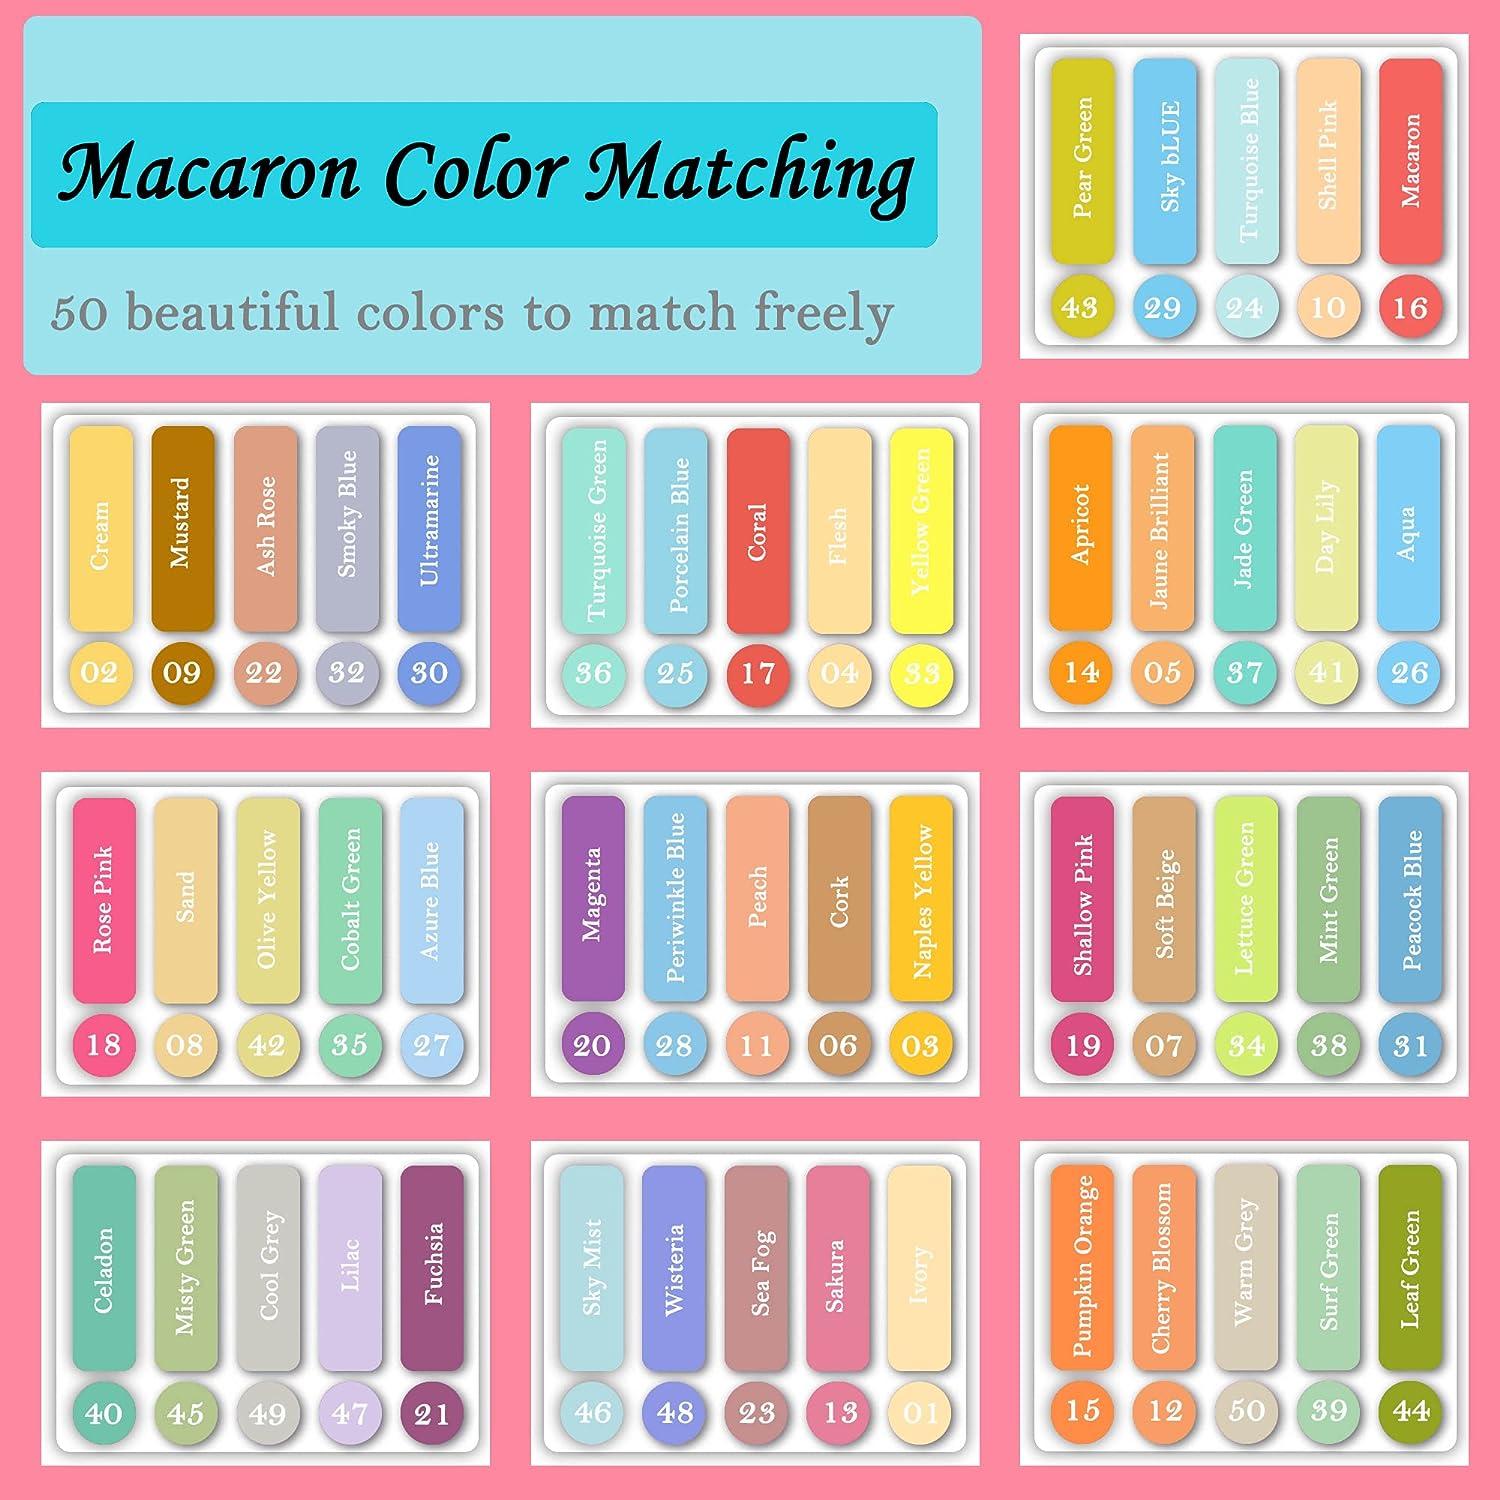 50 Macaron Pastel Colored Pencils for Adult Coloring, Soft Core Colored  Pencils